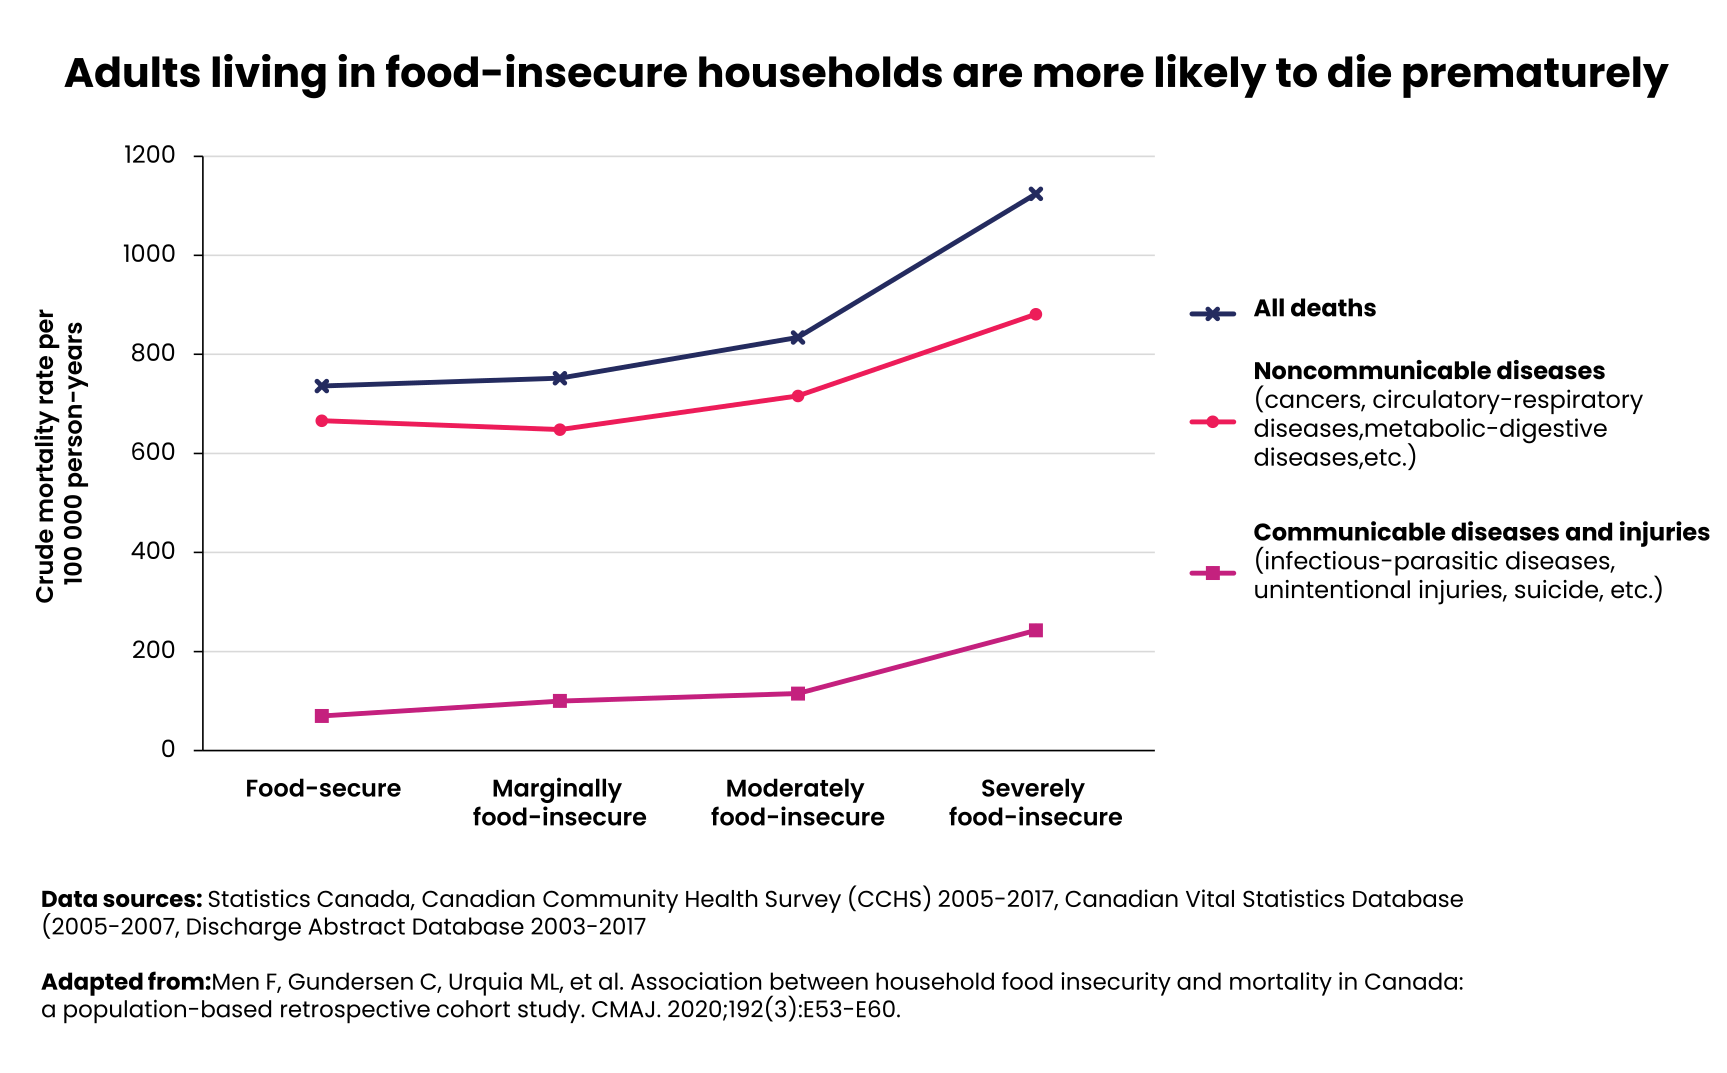 Adults living in food-insecure households are more likely to die prematurely.